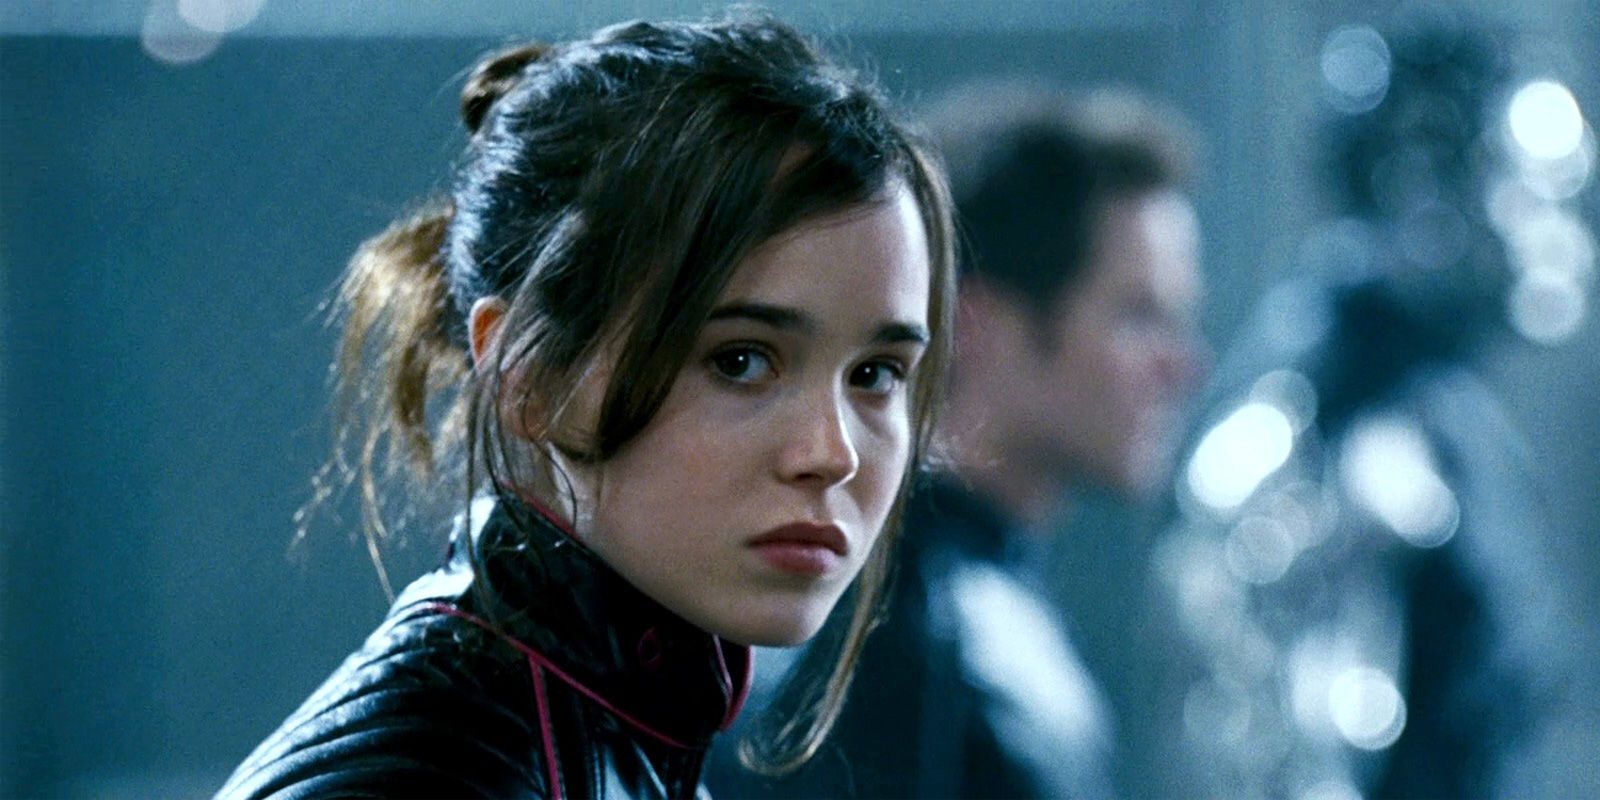 Ellen Page as Kitty Pryde in X-Men: The Last Stand